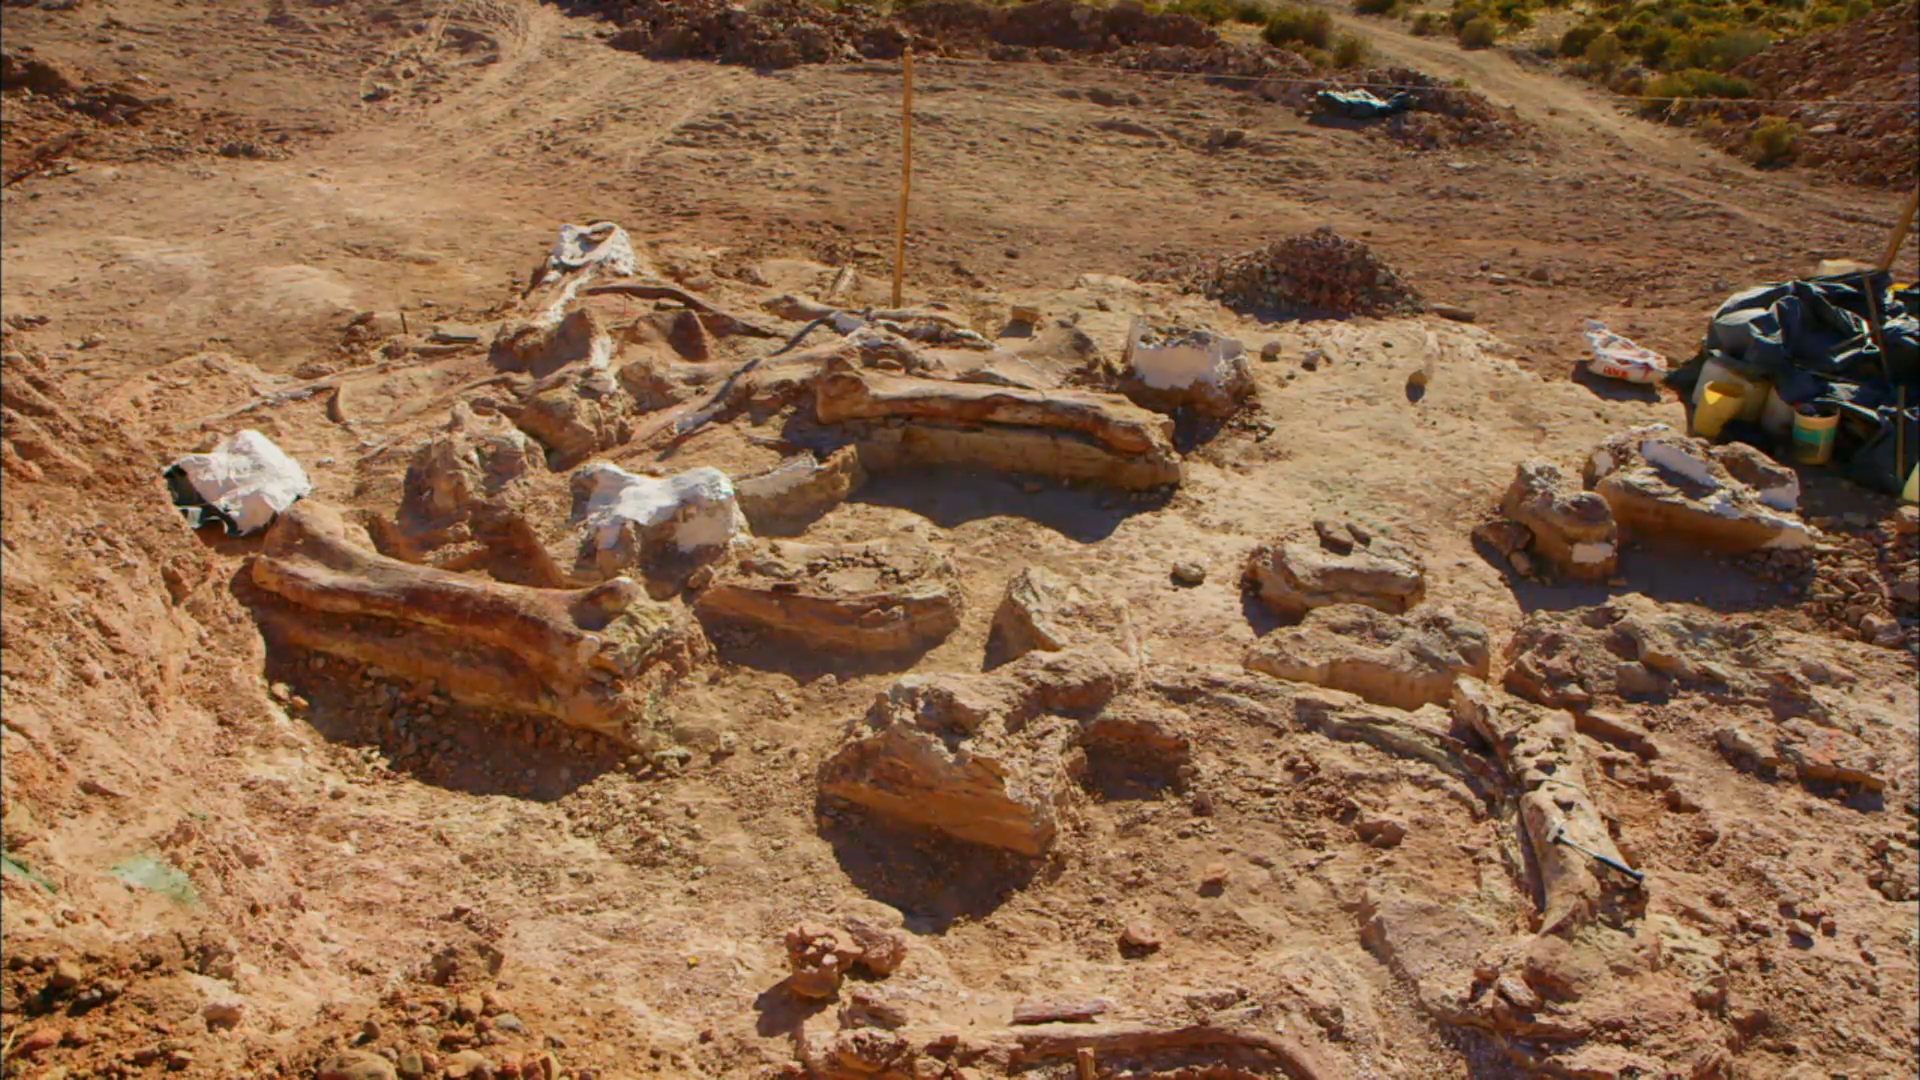 Examining the Evidence: How Did a Group of Dinosaurs Die?